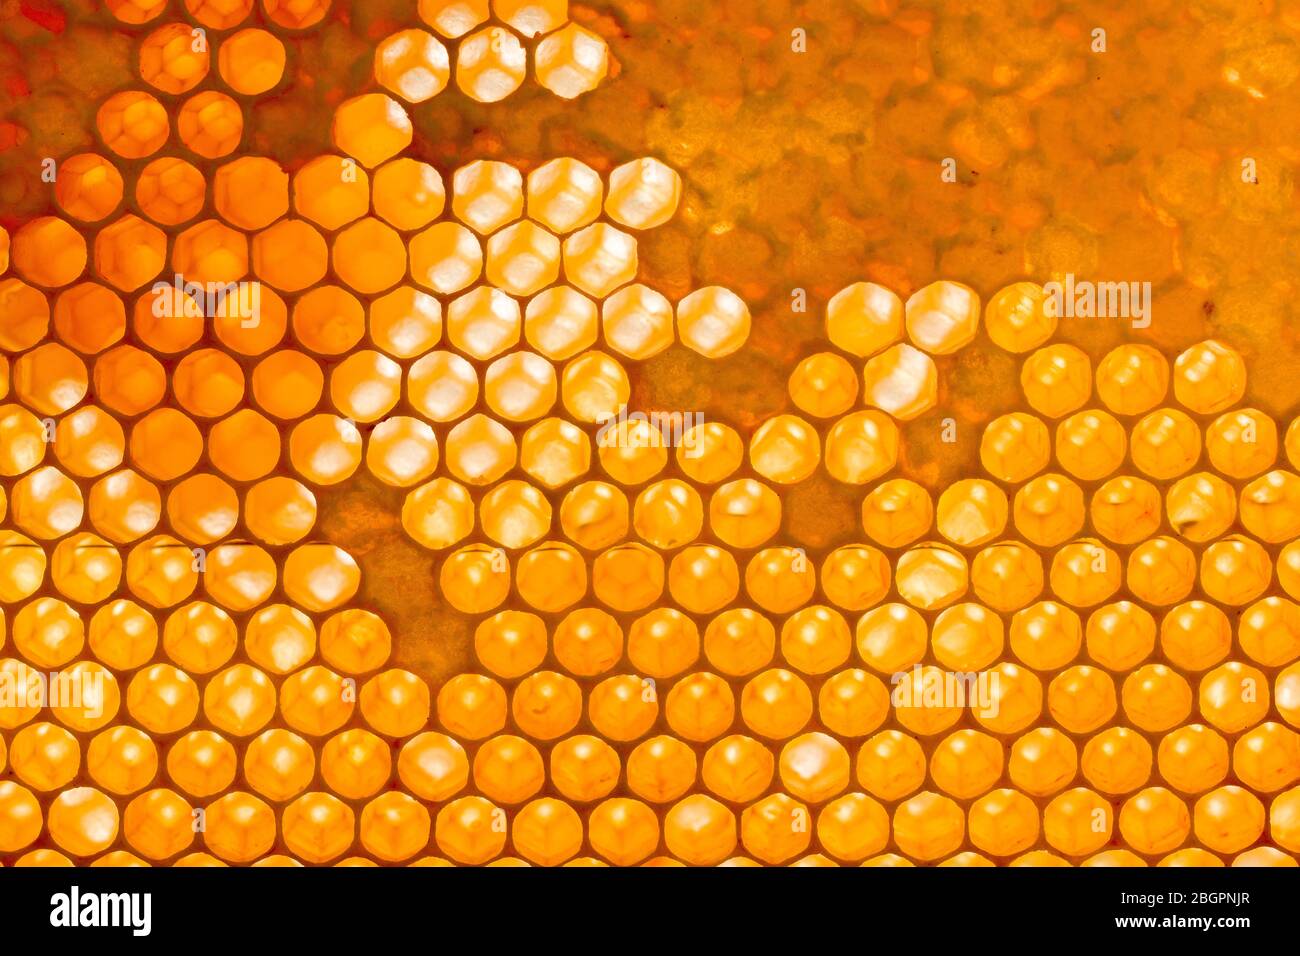 Hexagonal beehive pattern of a honeycomb divider, some of the cells sealed Stock Photo